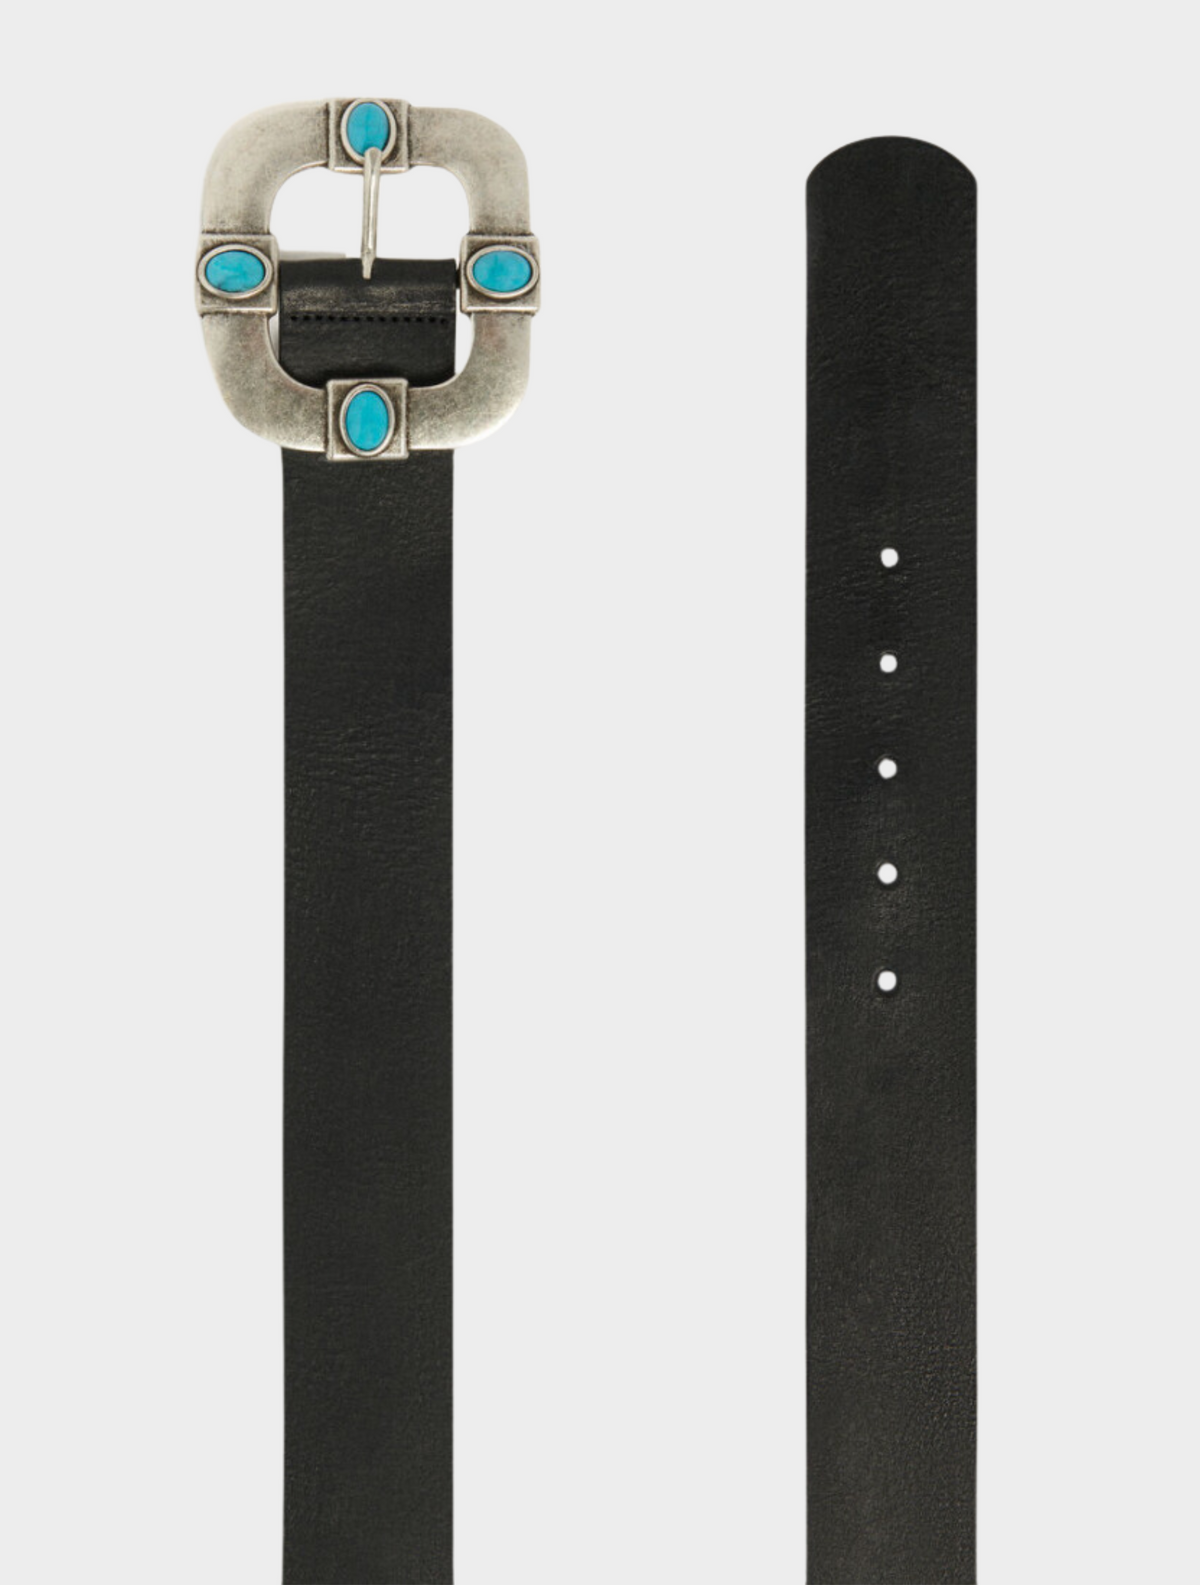 Black leather belt with square matt silver buckle with turquoise oval inserts